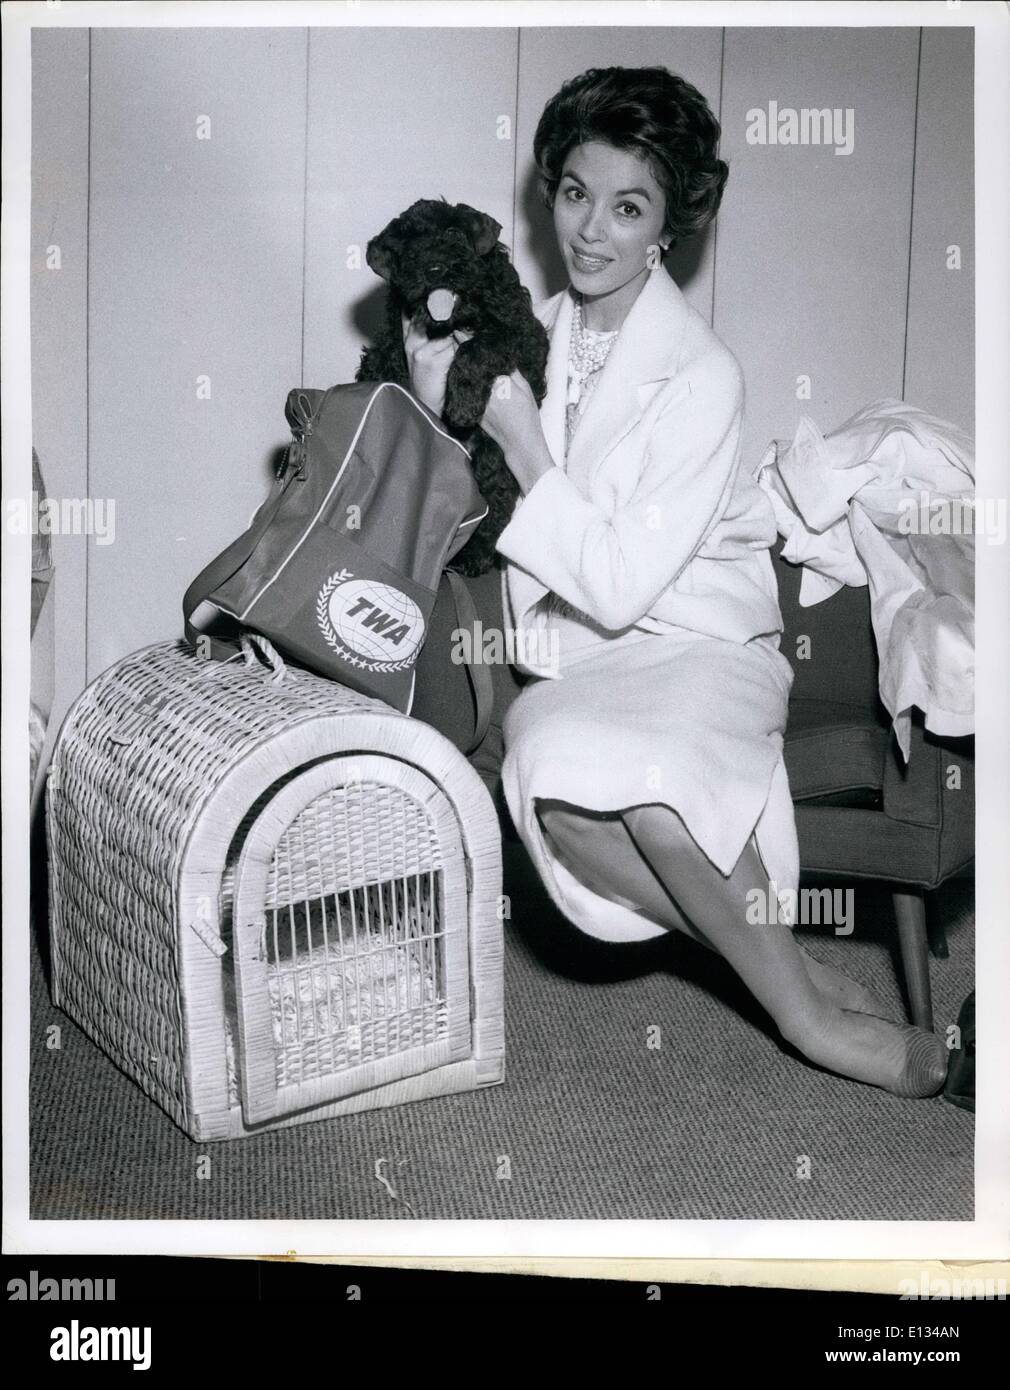 Feb. 28, 2012 - N.Y. International Airport Lovely English import Dana Wynter gets acquainted with her recently acquired nameless dog prior to superjetting via TWA for Los Angeles. Miss Wynter, who is married to Greg Beutzer, was in town to help publicize her latest movie ''On the double'' with Danny Kaye. Stock Photo